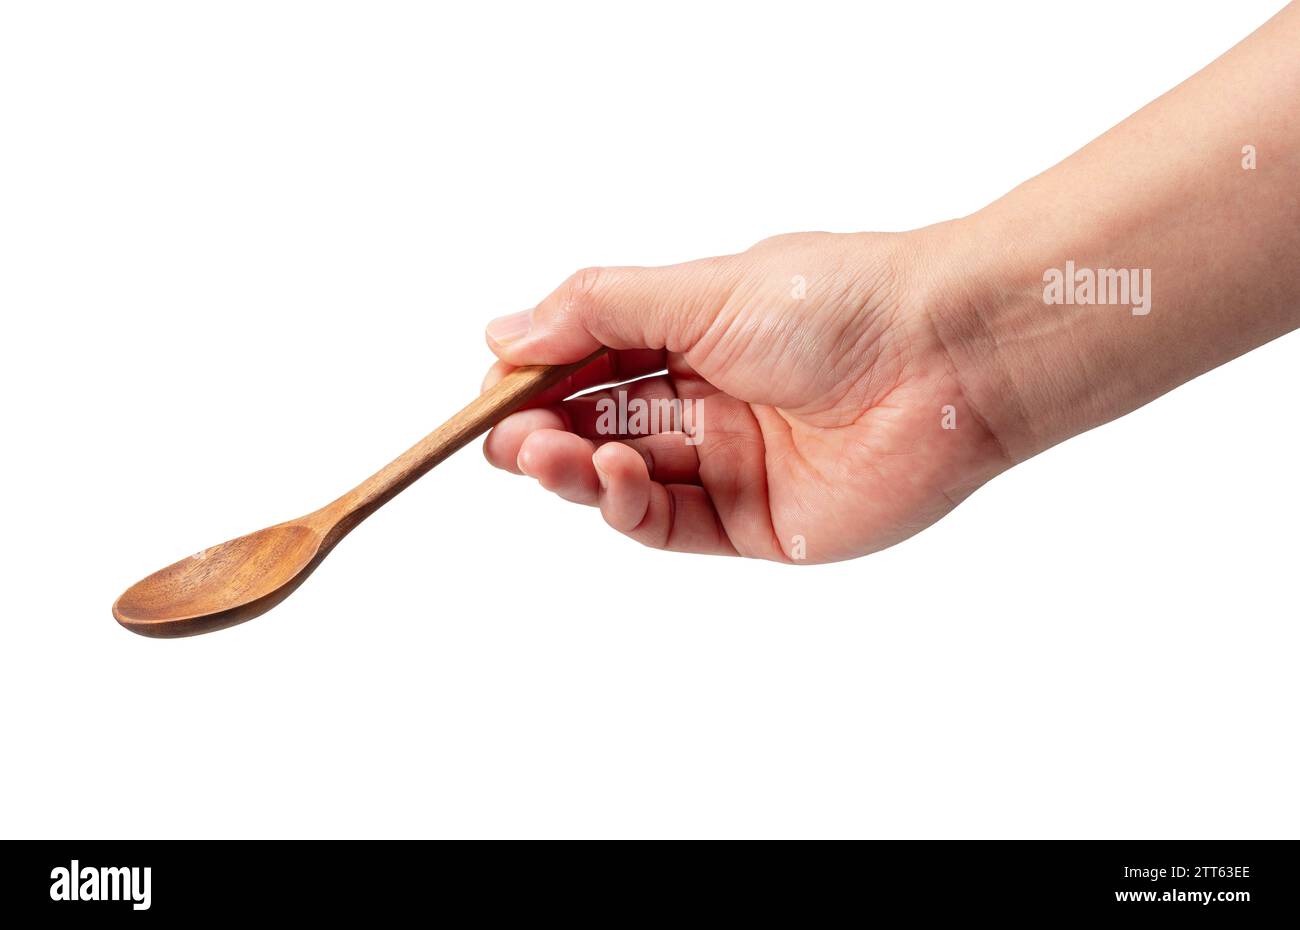 Wooden spoon in men's hand isolated on white background Stock Photo